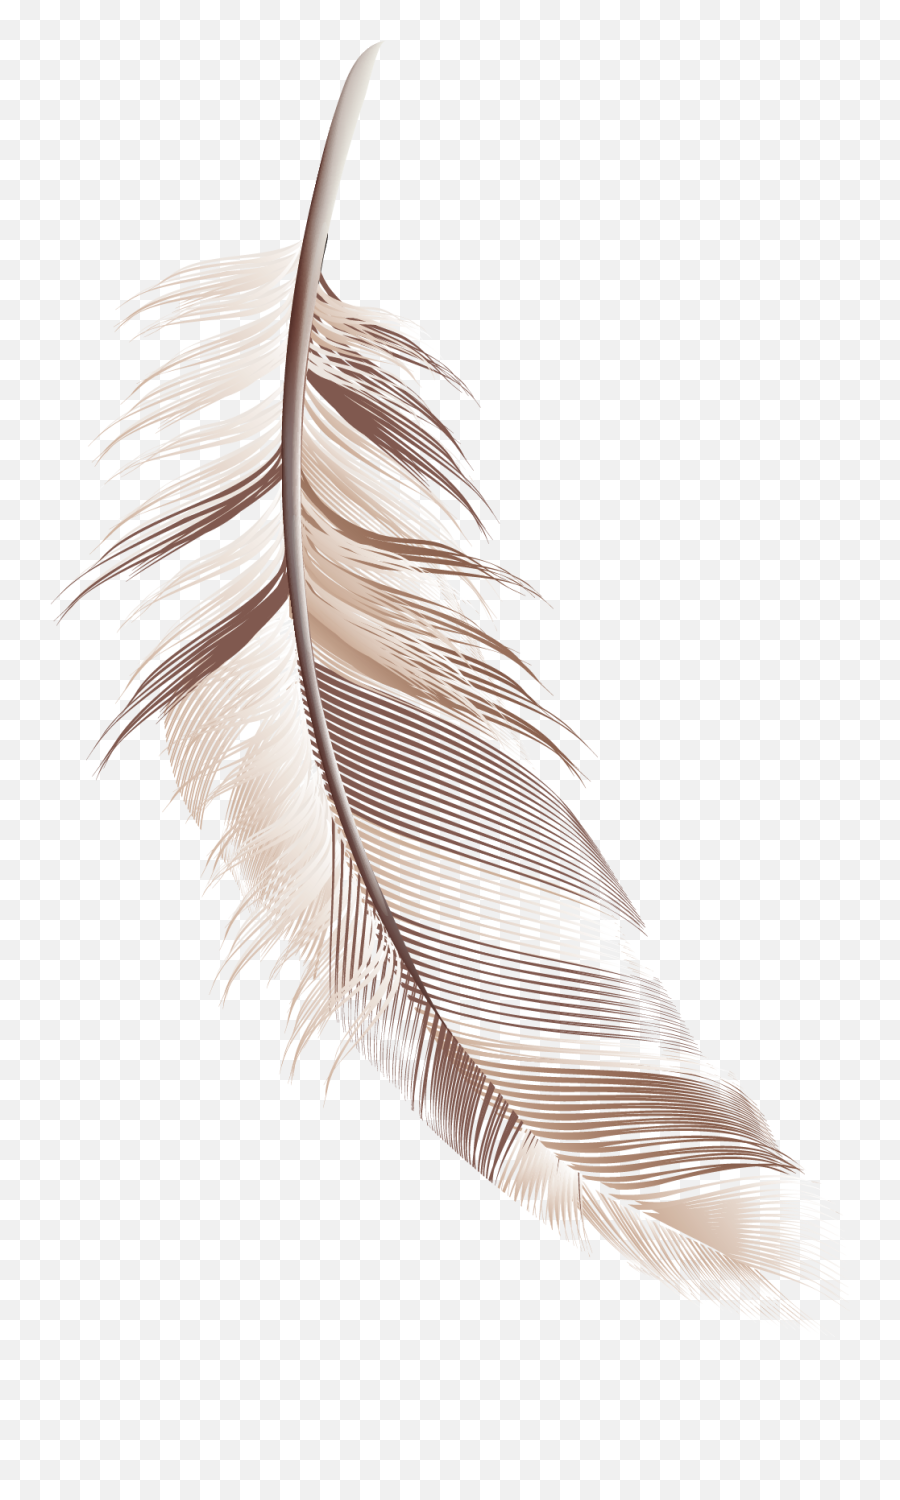 Cartoon Feather Material Png Download - Transparent Background Feather Cartoon Png,Feather Transparent Background